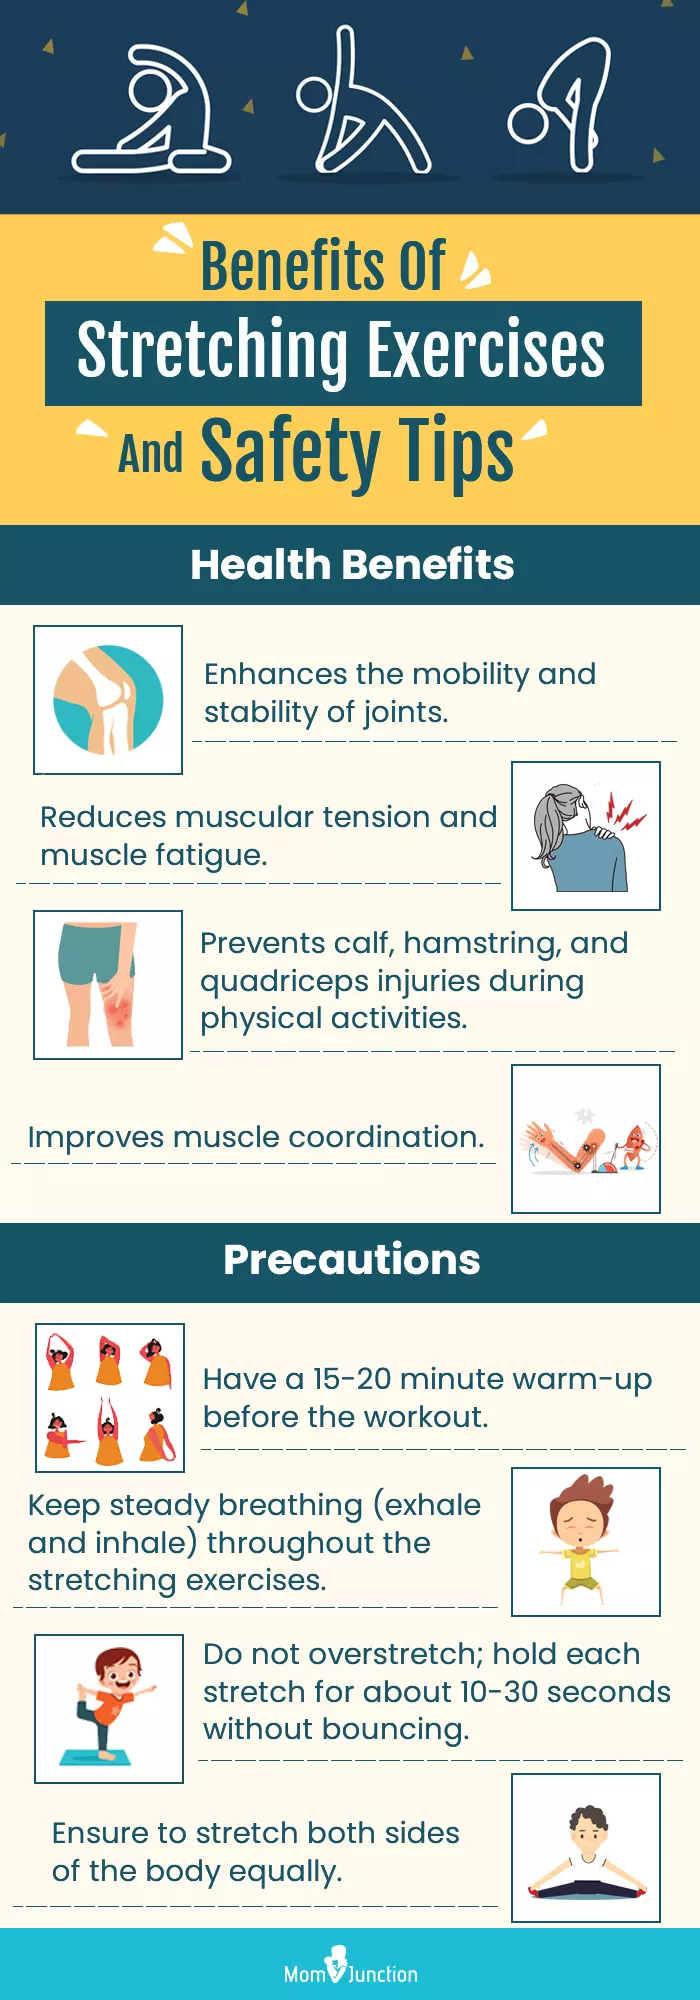 benefits of stretching exercises ans safety tips (infographic)